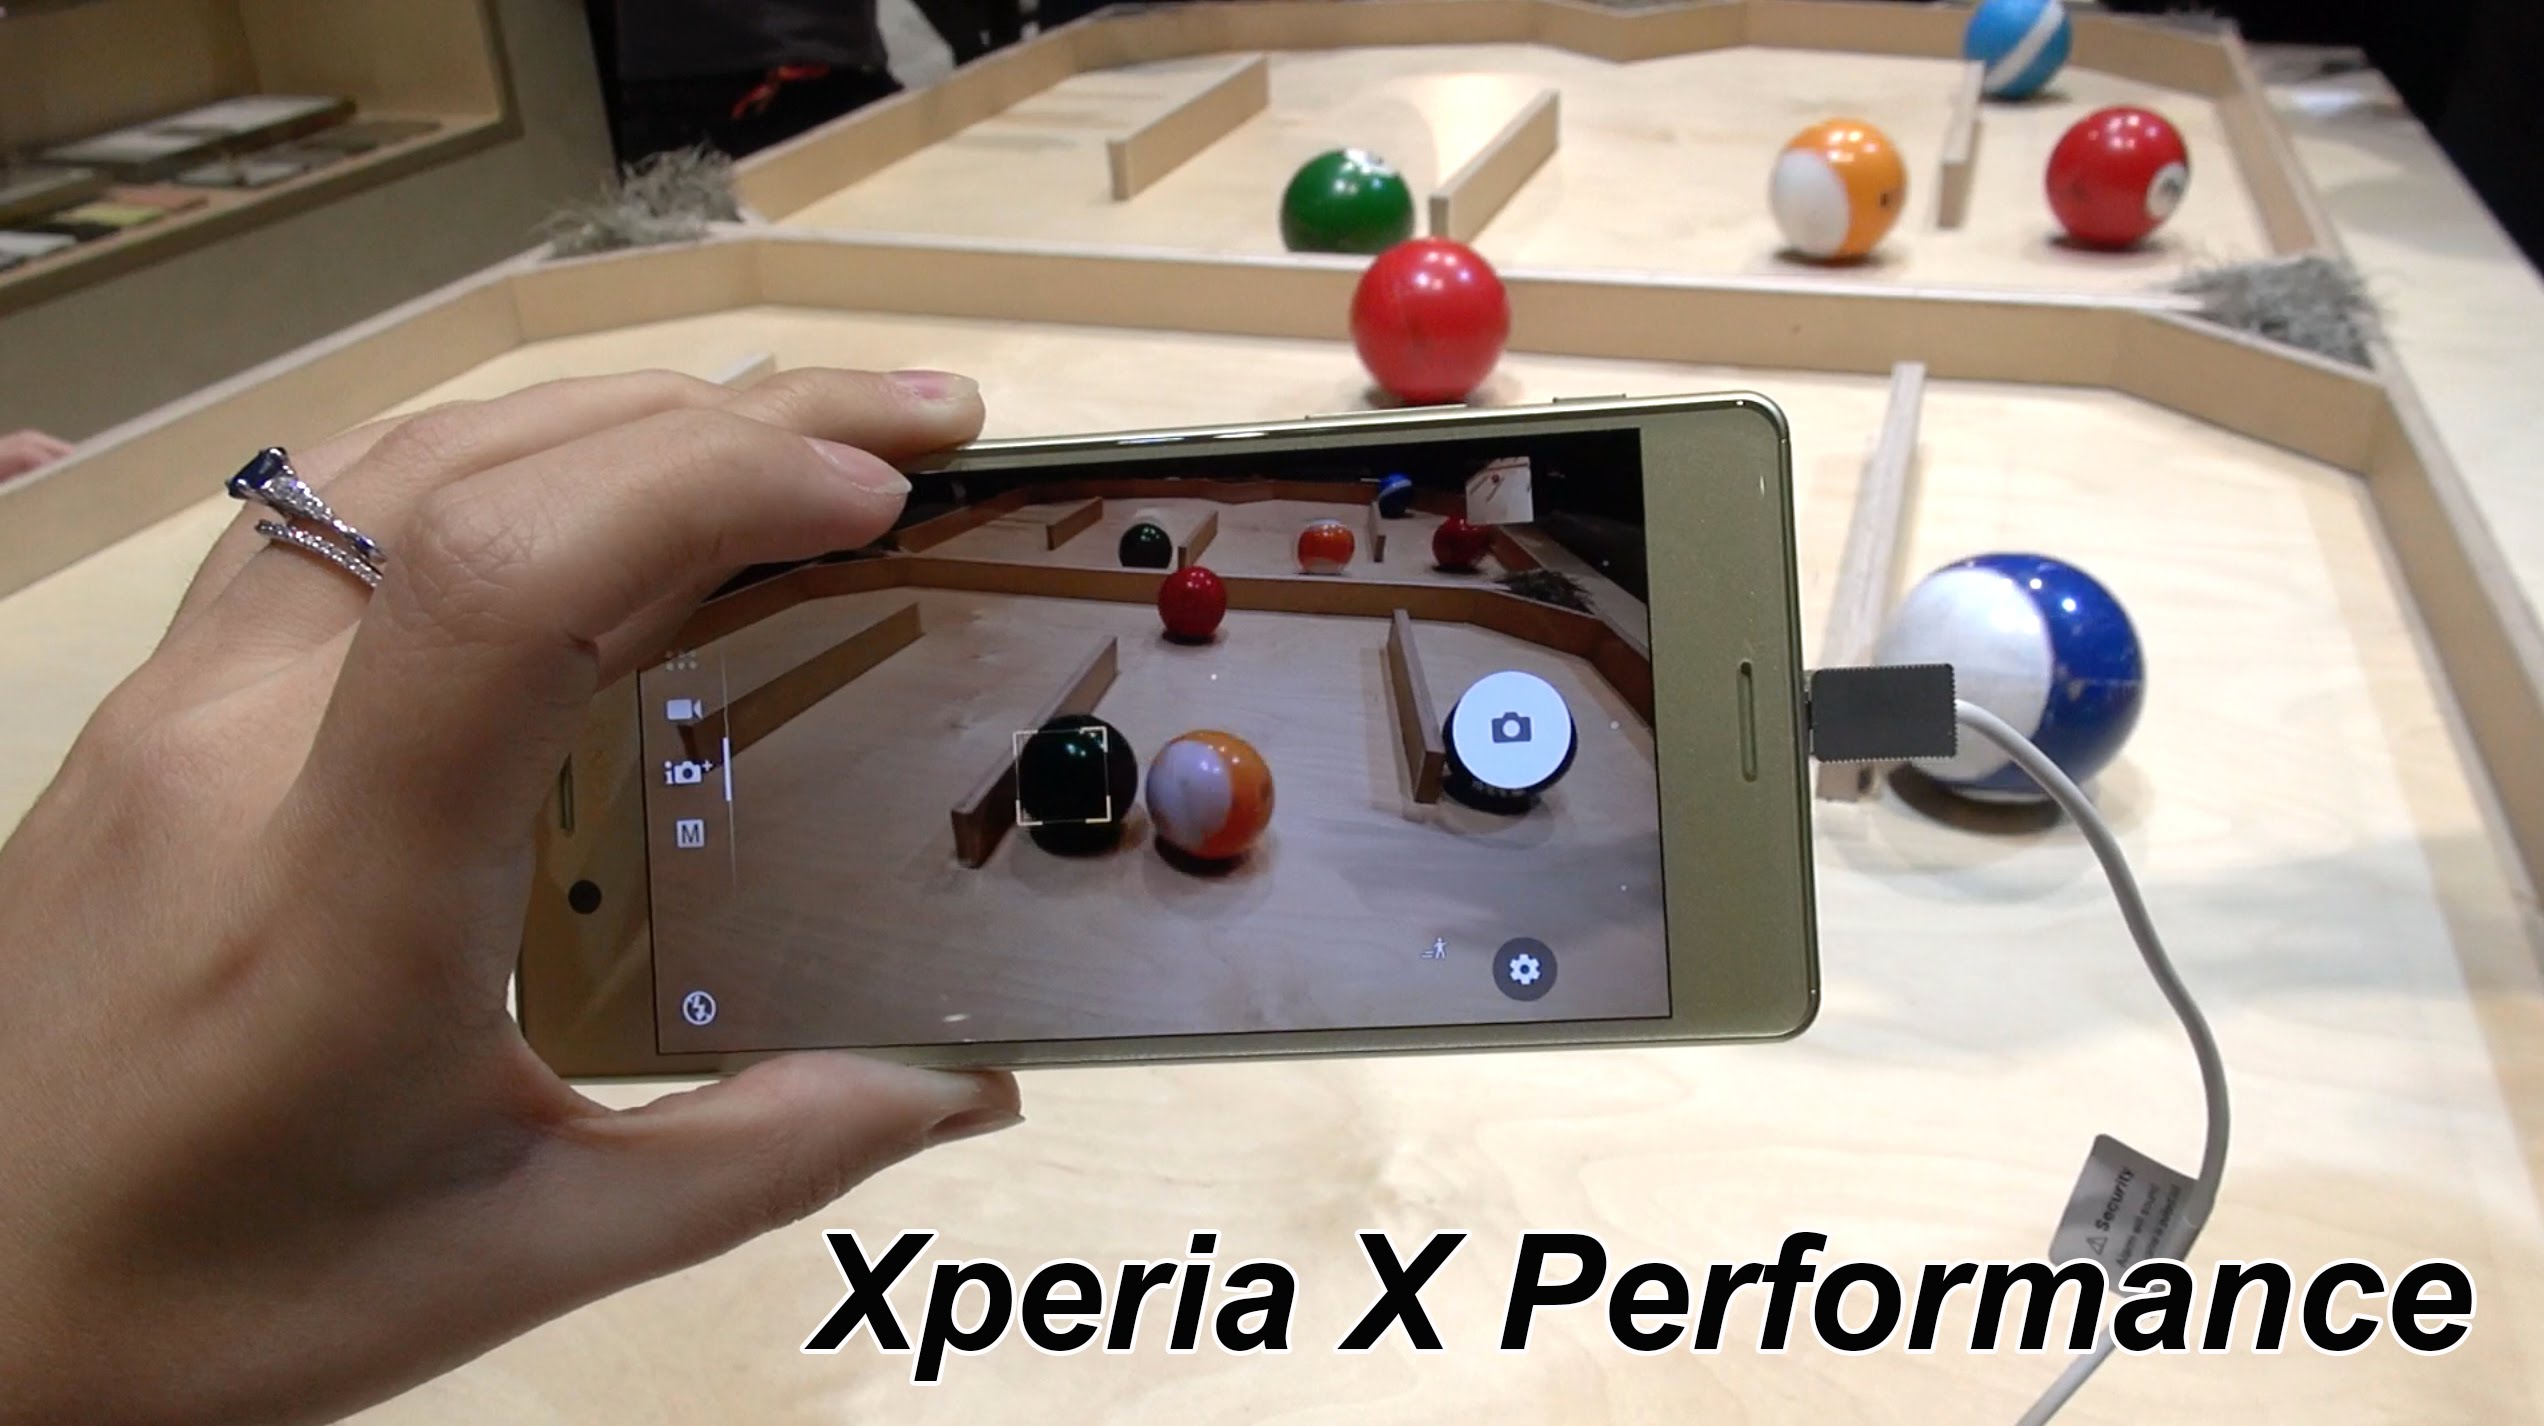 Xperia X Performance: Hands On & Impressions